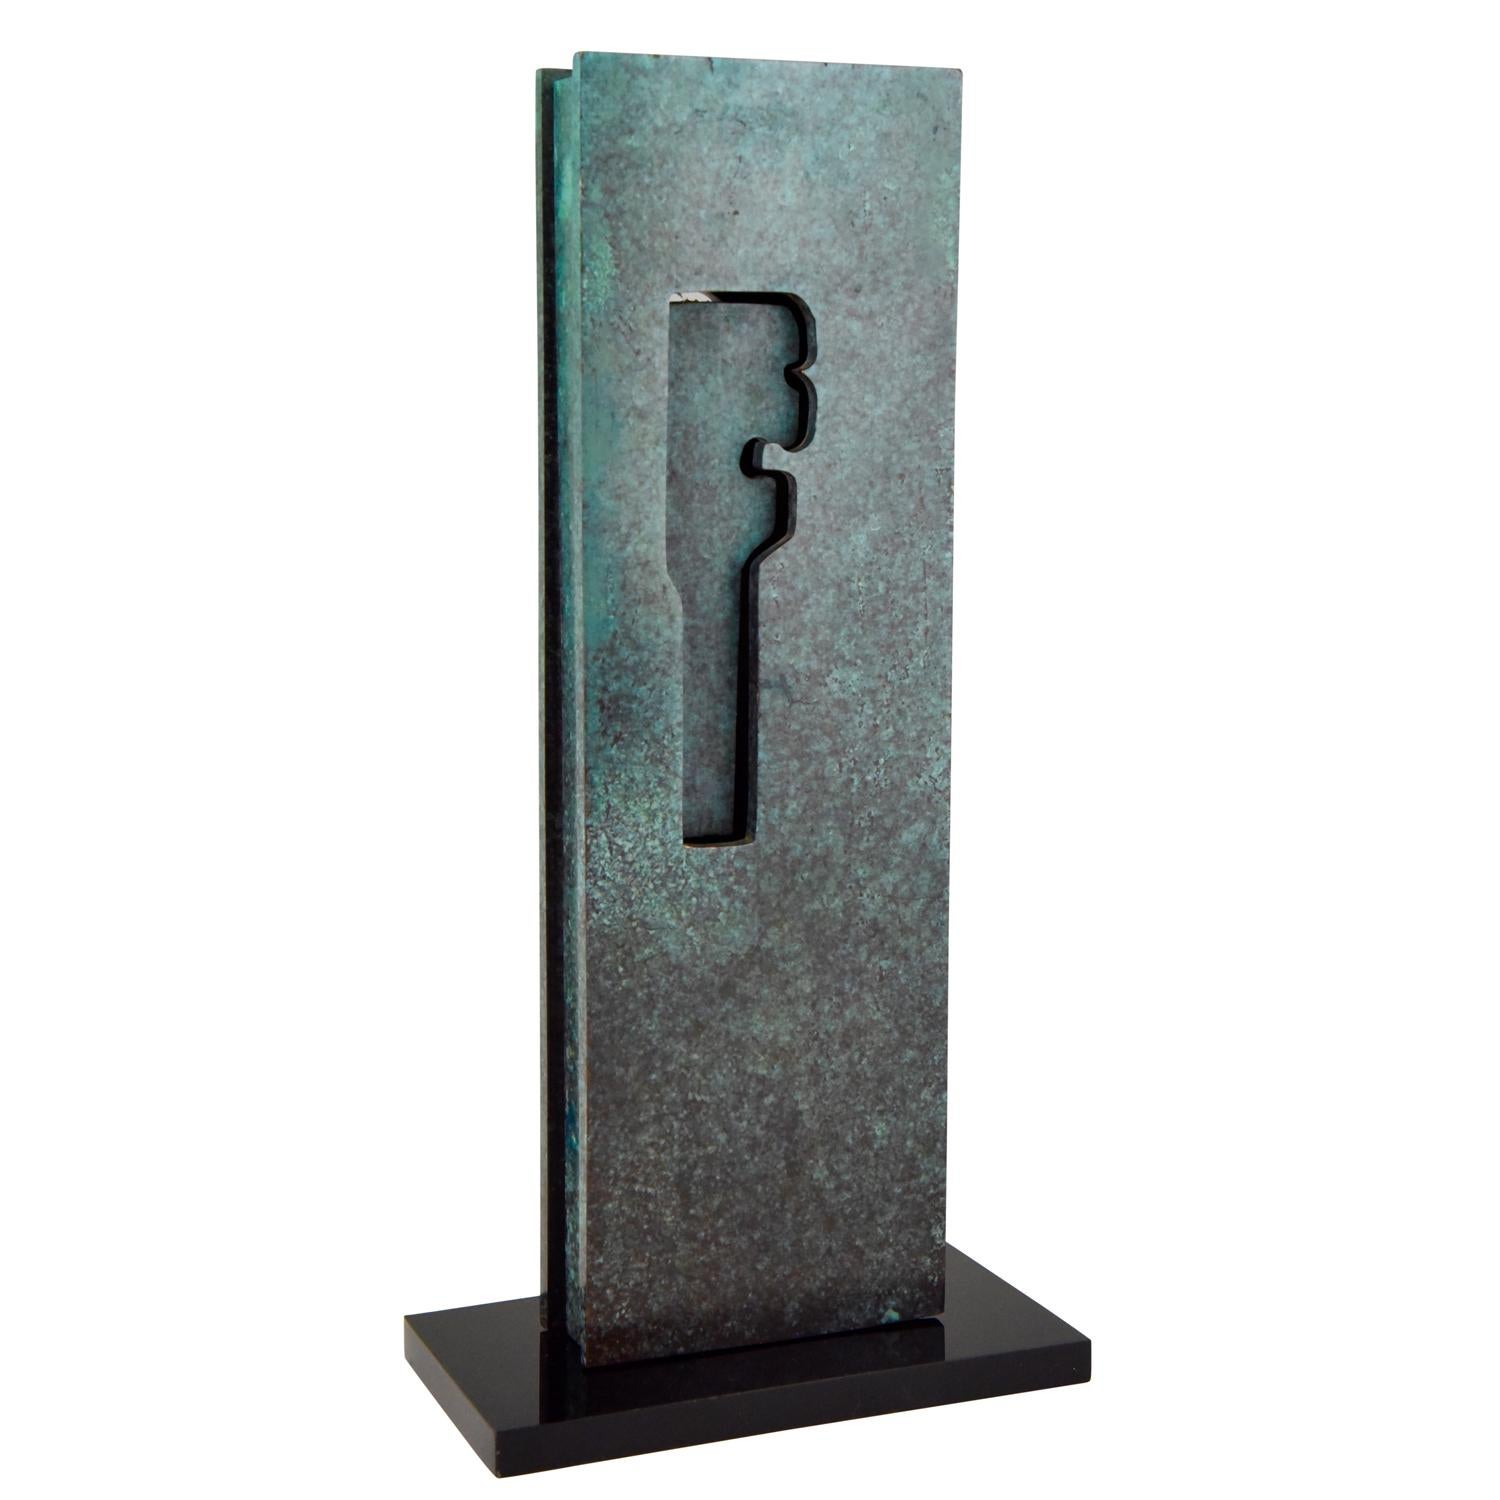 Stylish Mid-Century Modern bronze sculpture by artist Félix Villamor, he was born in Spain in 1940. This artist joined the 